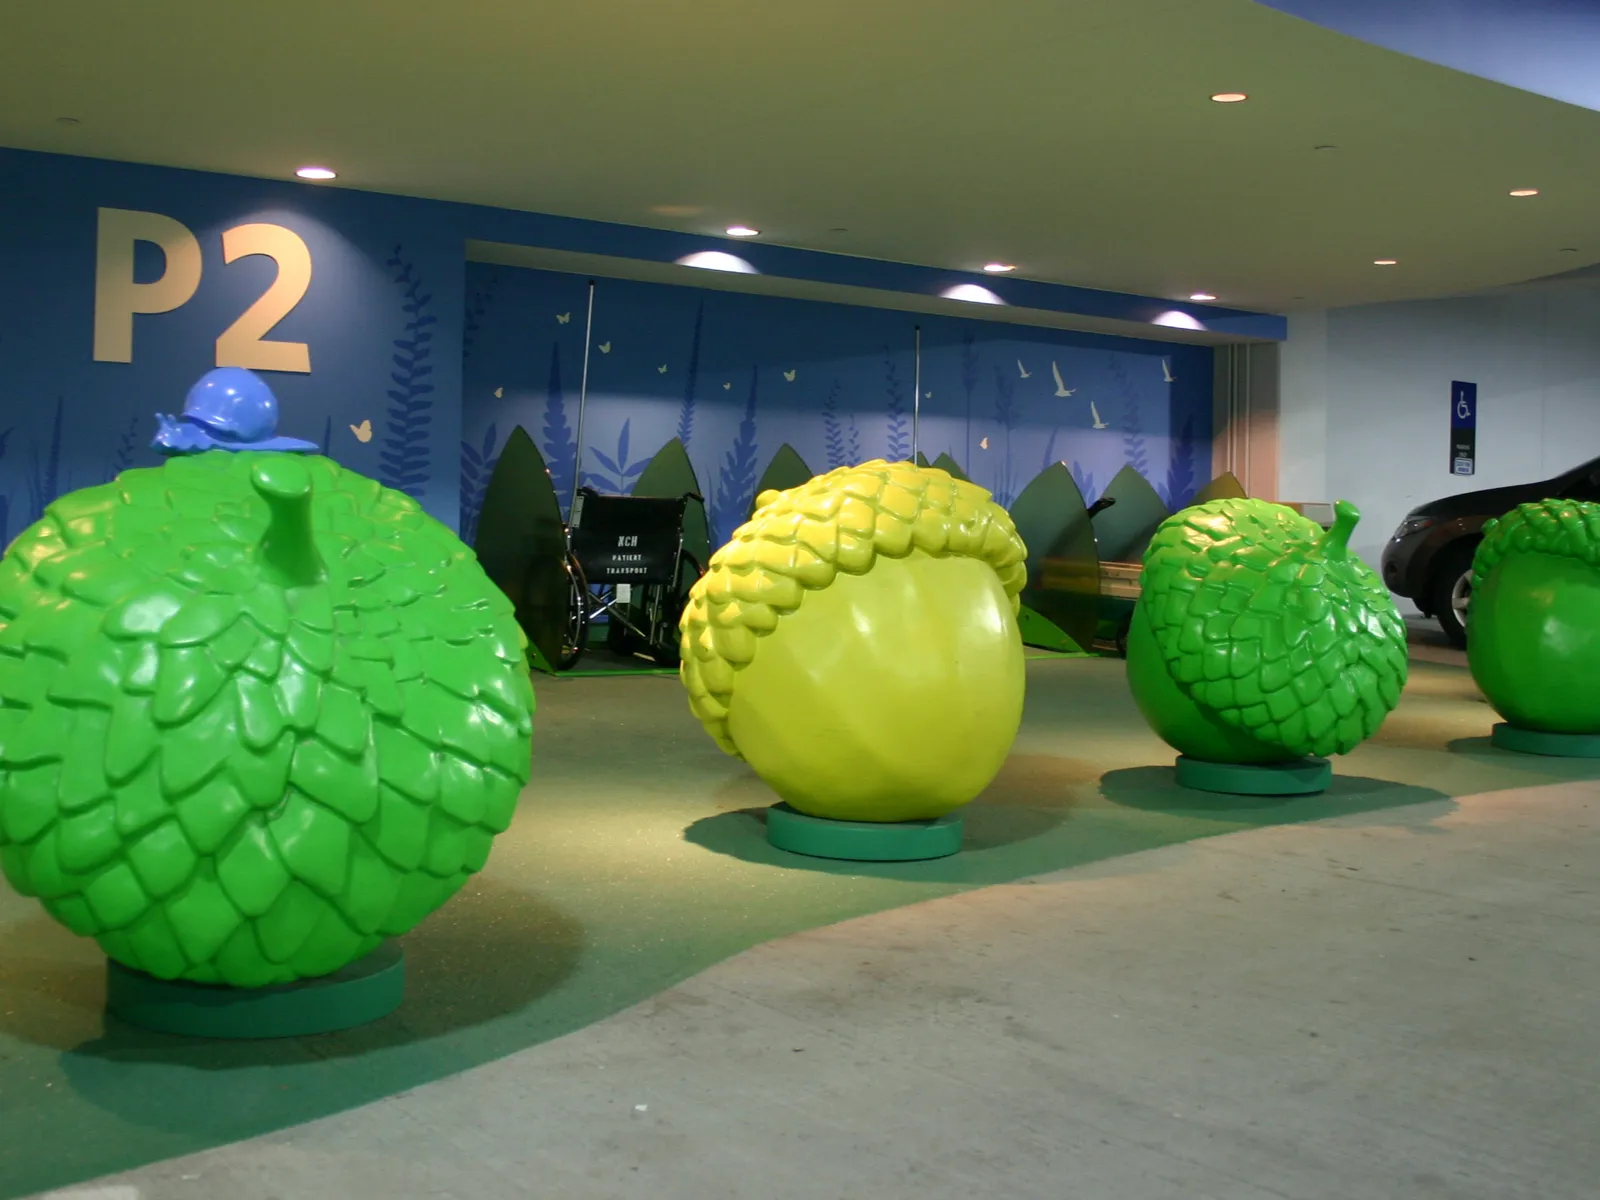 Large green and yellow acorn sculptures front view